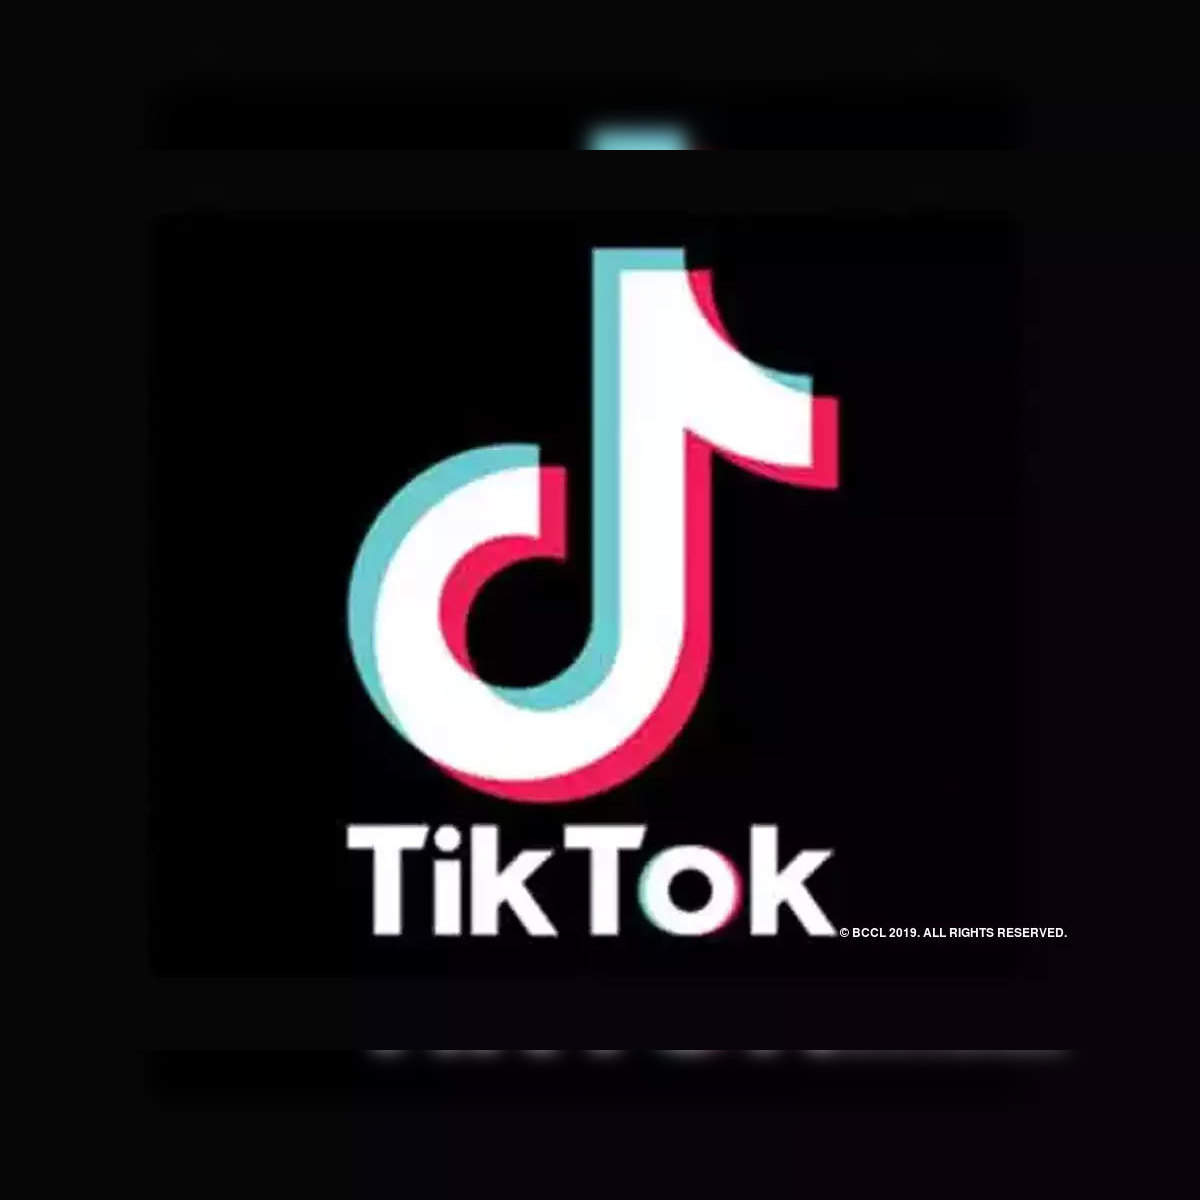 Breaking: Madras High Court lifts ban on download of TikTok mobile app